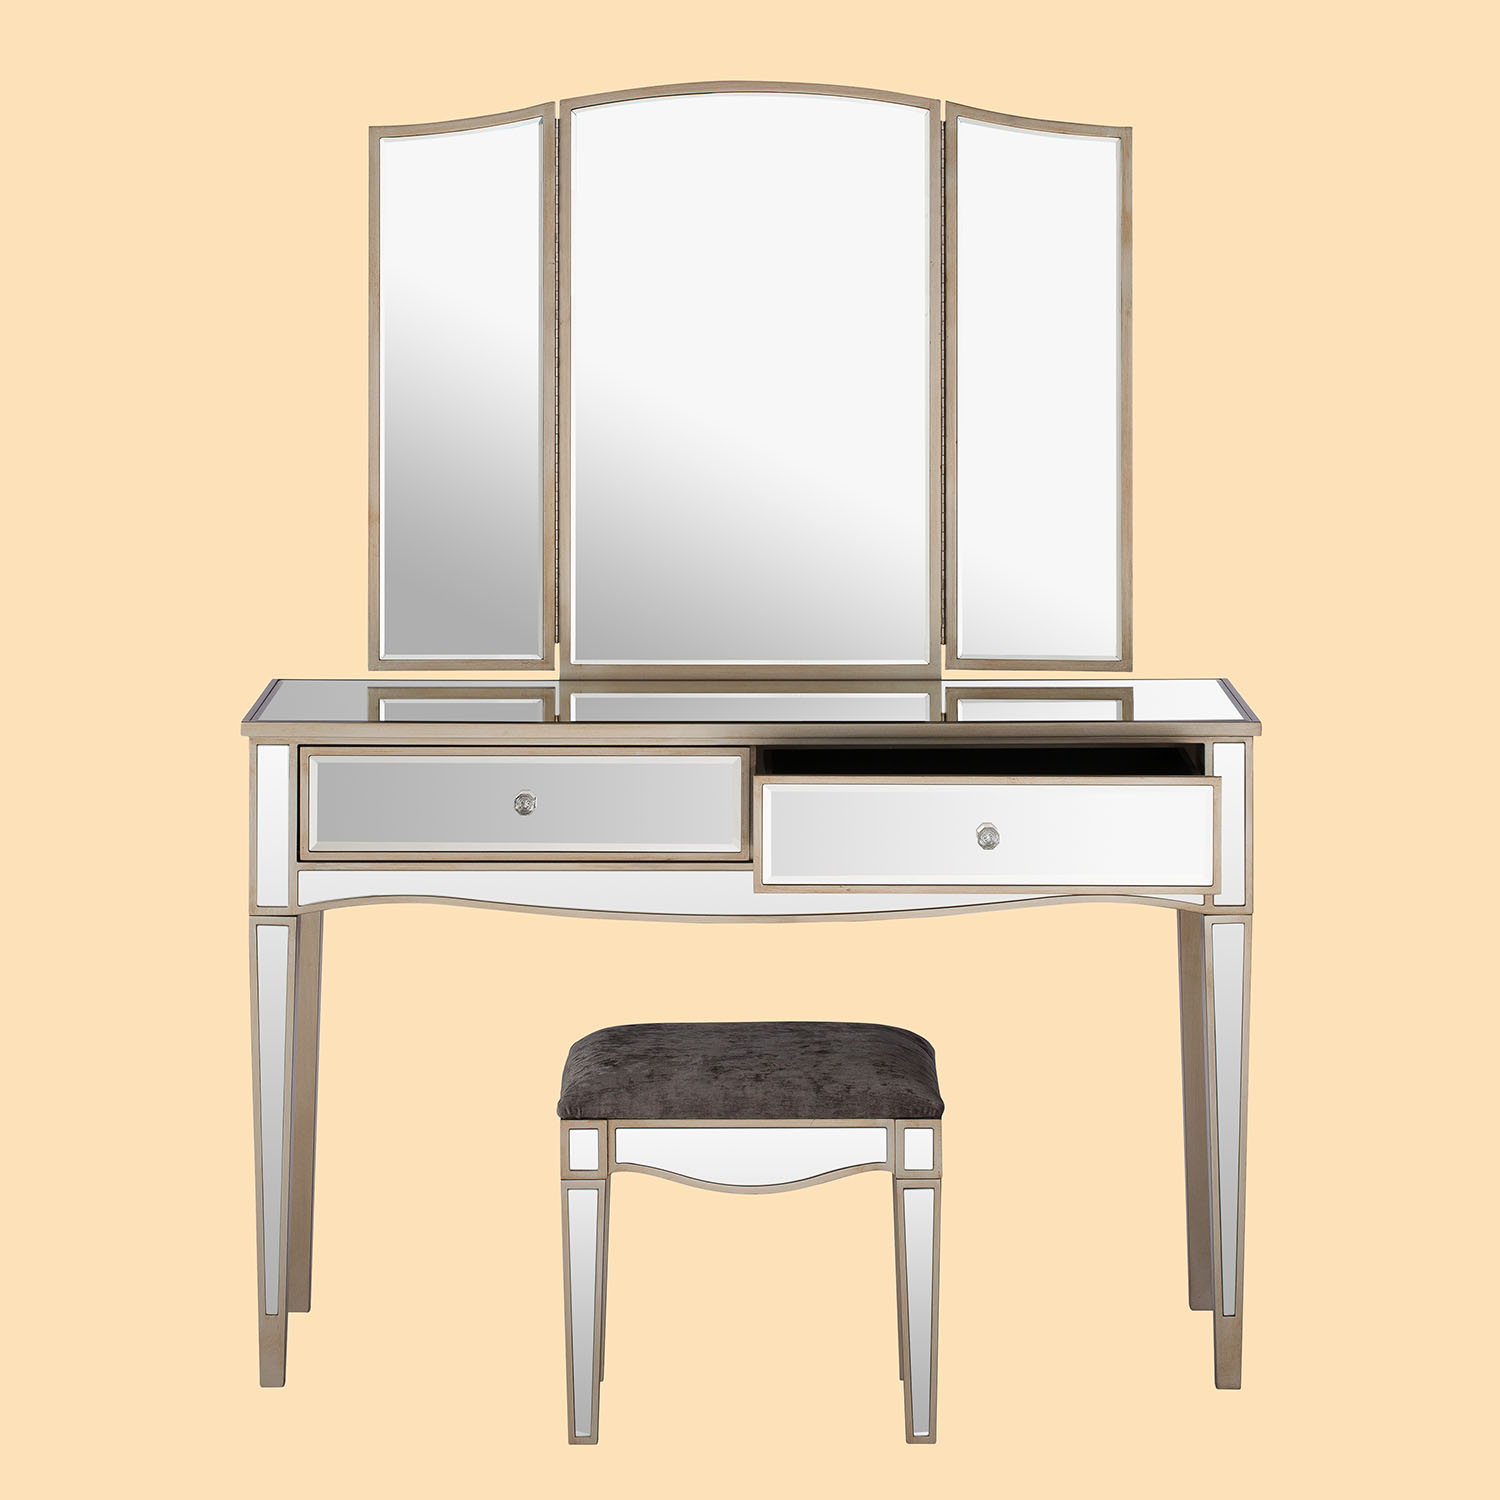 Mirrored dressing table mirror stool furniture product